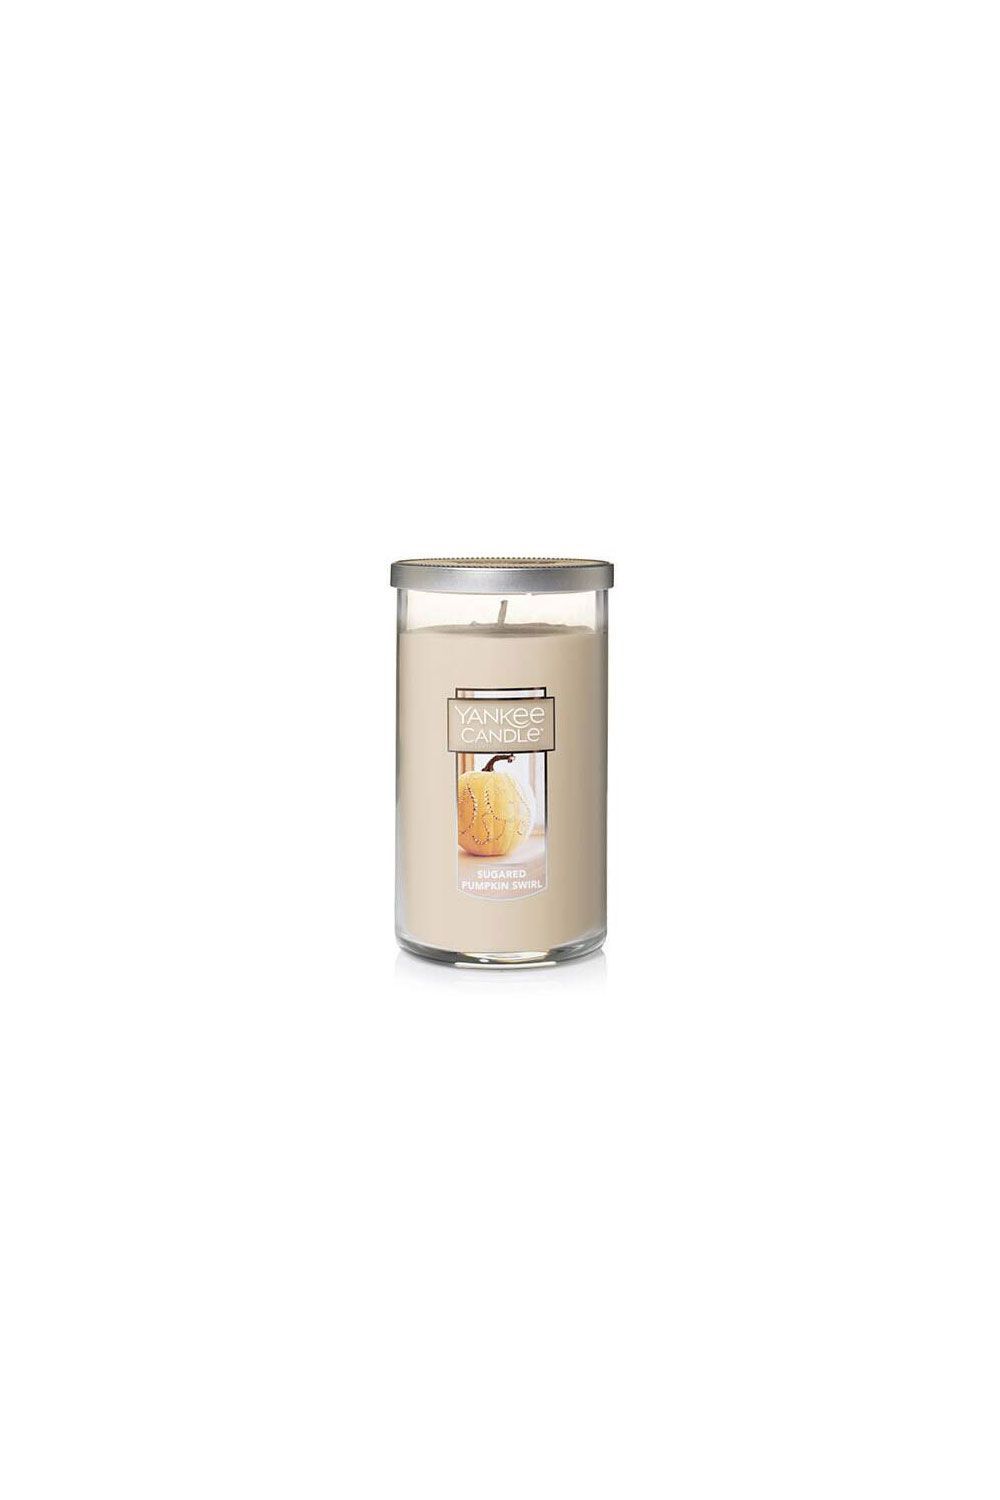 Candle that Smells Like Fireplace Inspirational Sugared Pumpkin Swirl Candle